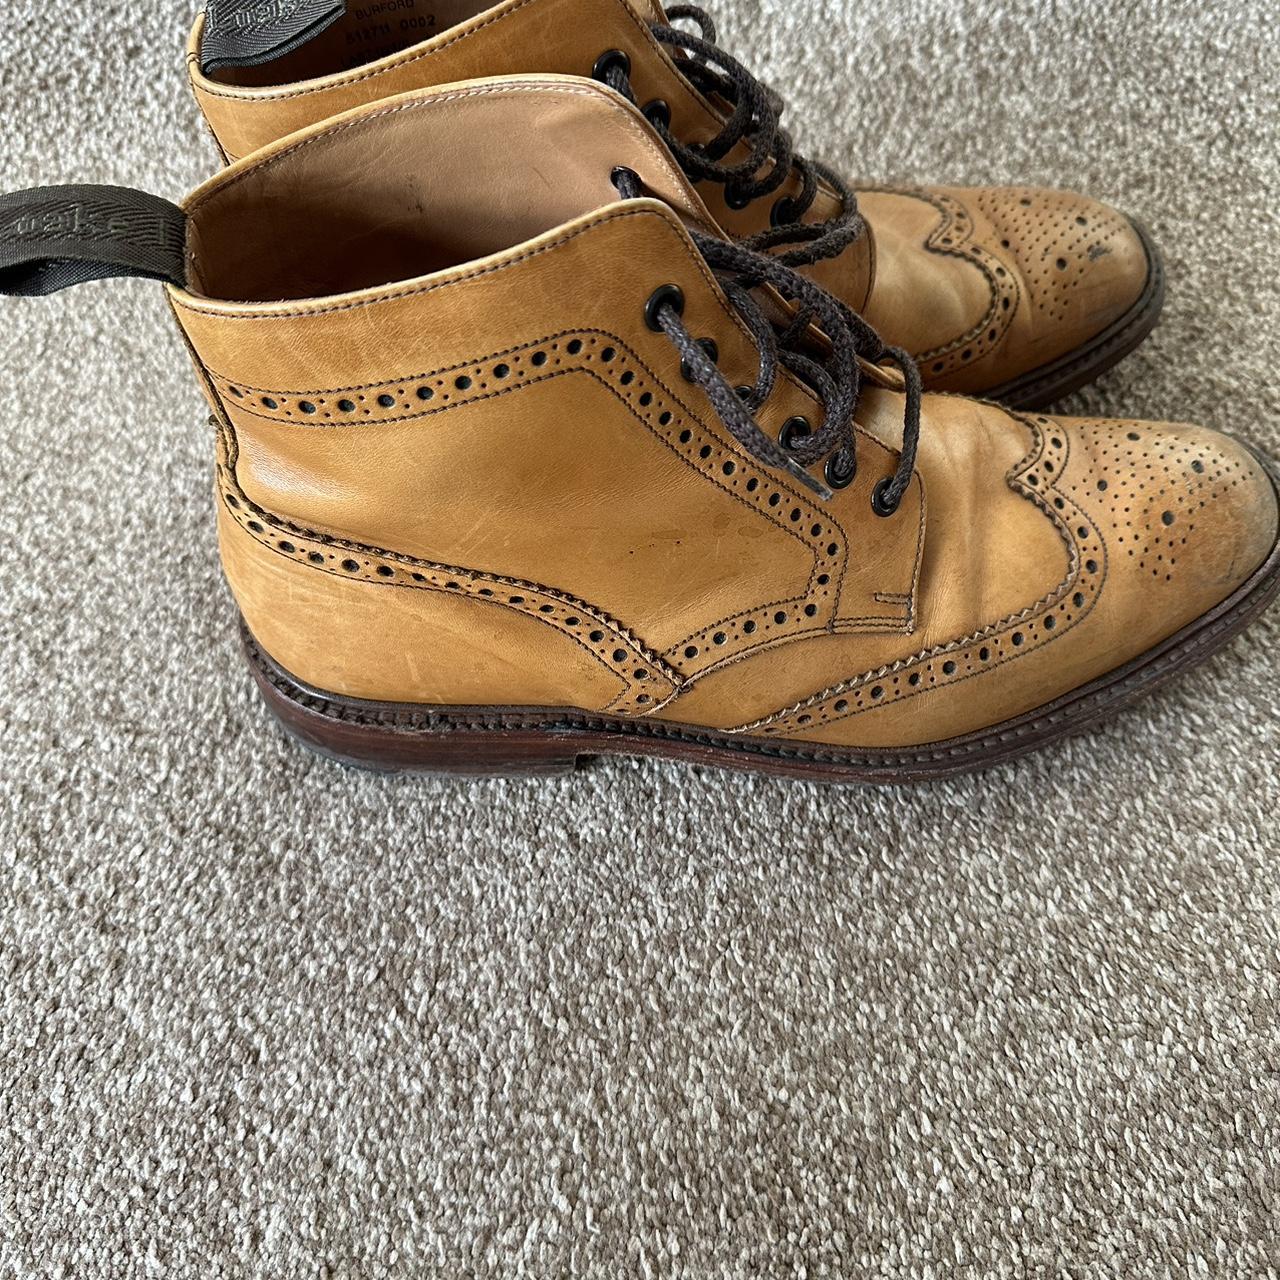 Loake burford size 9 ancle boots in good usable... - Depop